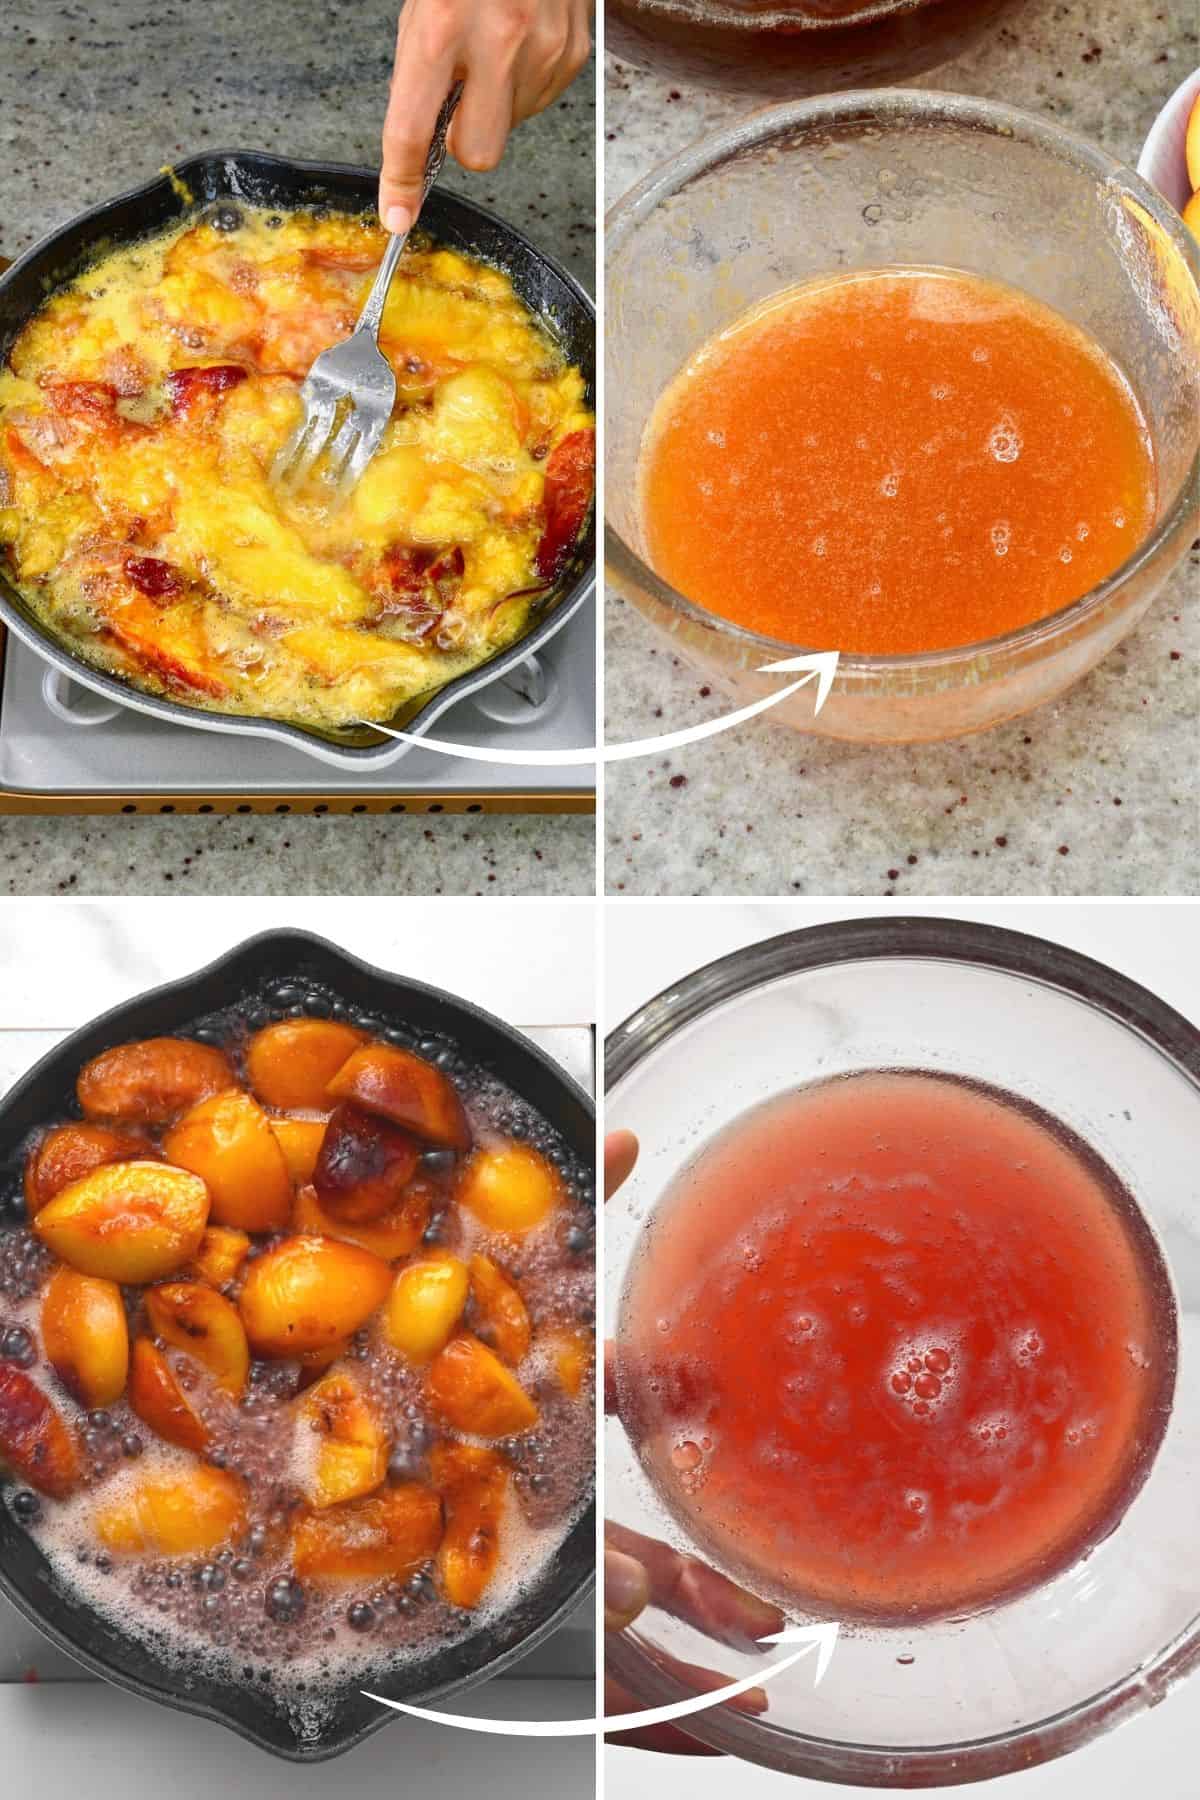 Comparing different ways to make peach syrup